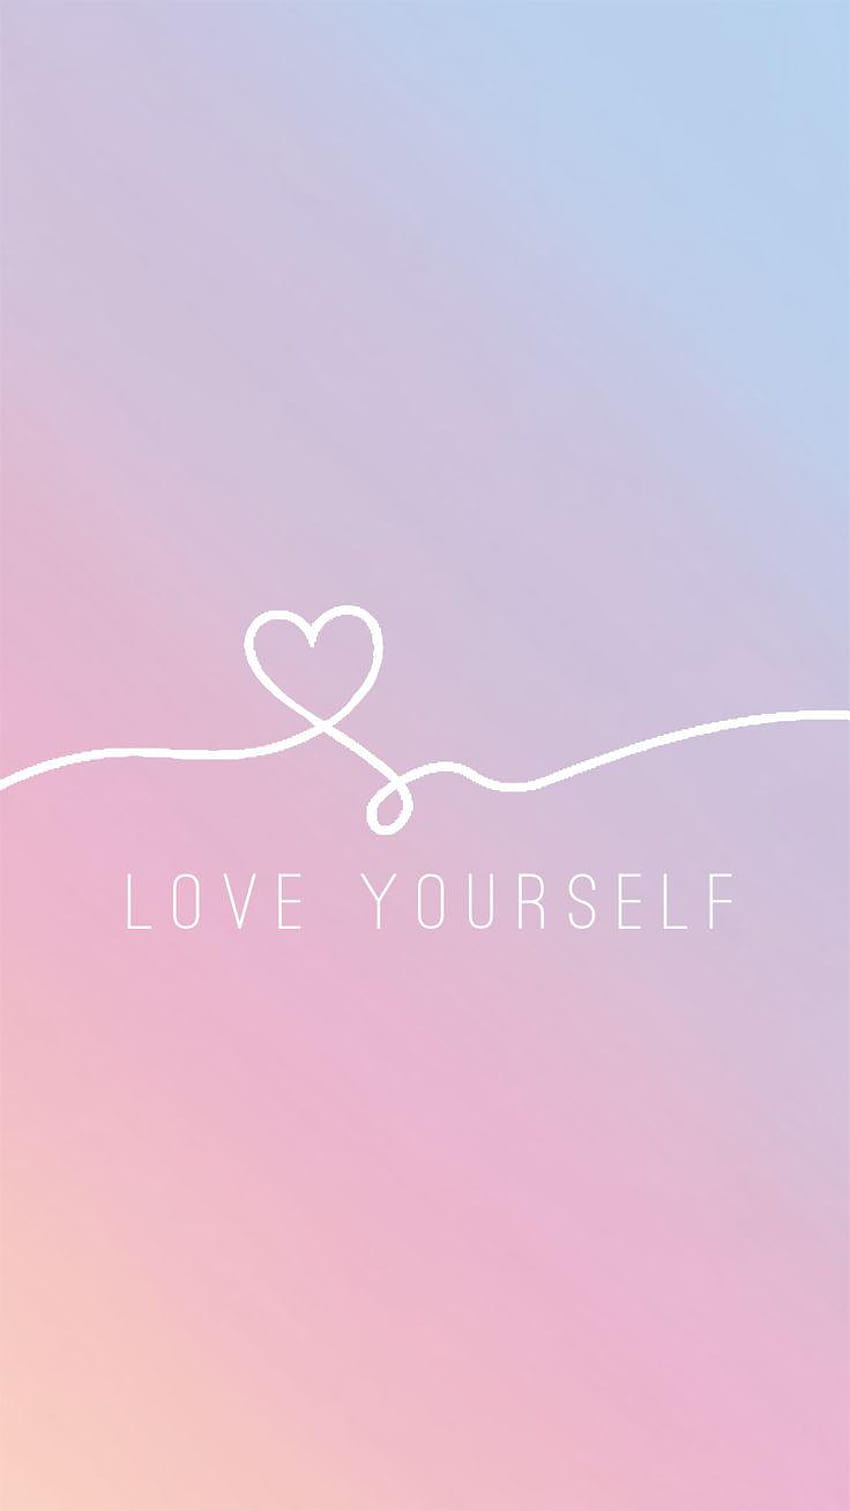 Love Yourself By Gocase, Bts, K, bts love yourself iphone HD phone ...